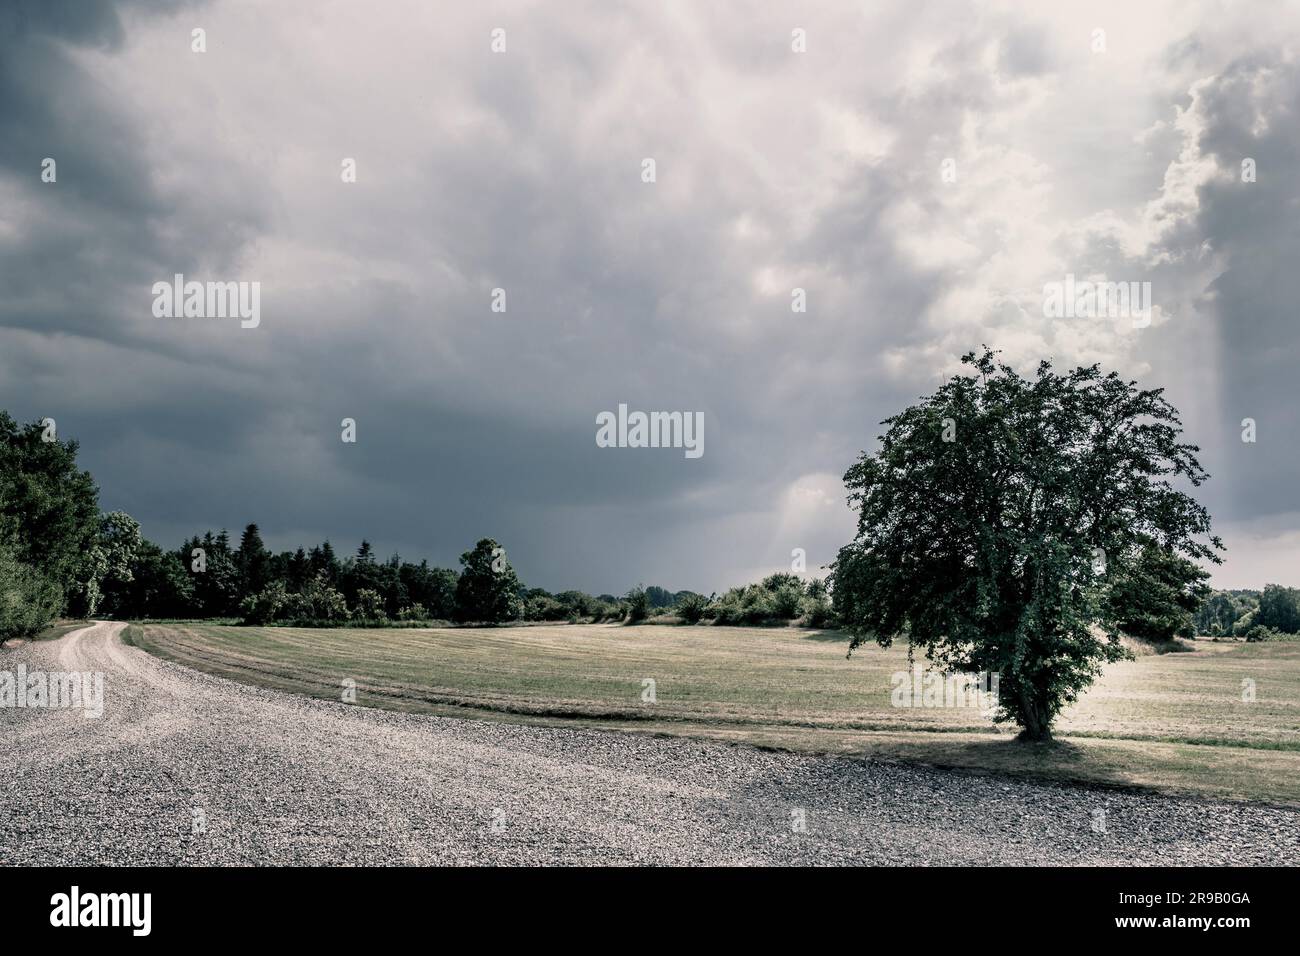 Green fields and cloudy weather Stock Photo